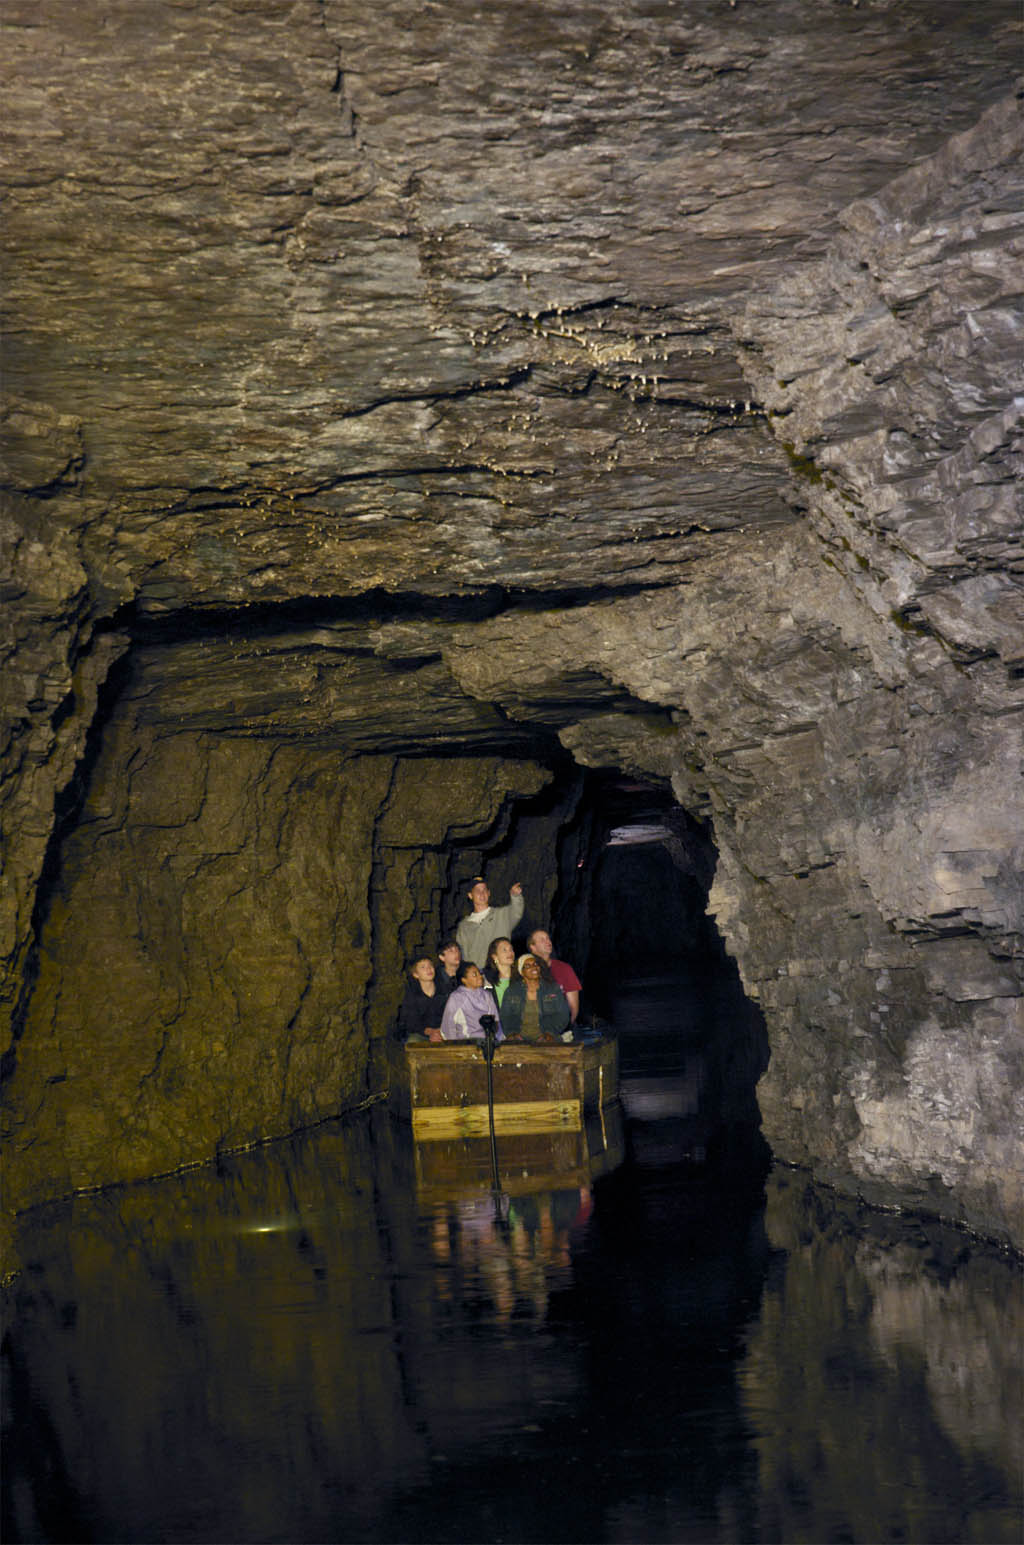 lockport canal cave tour